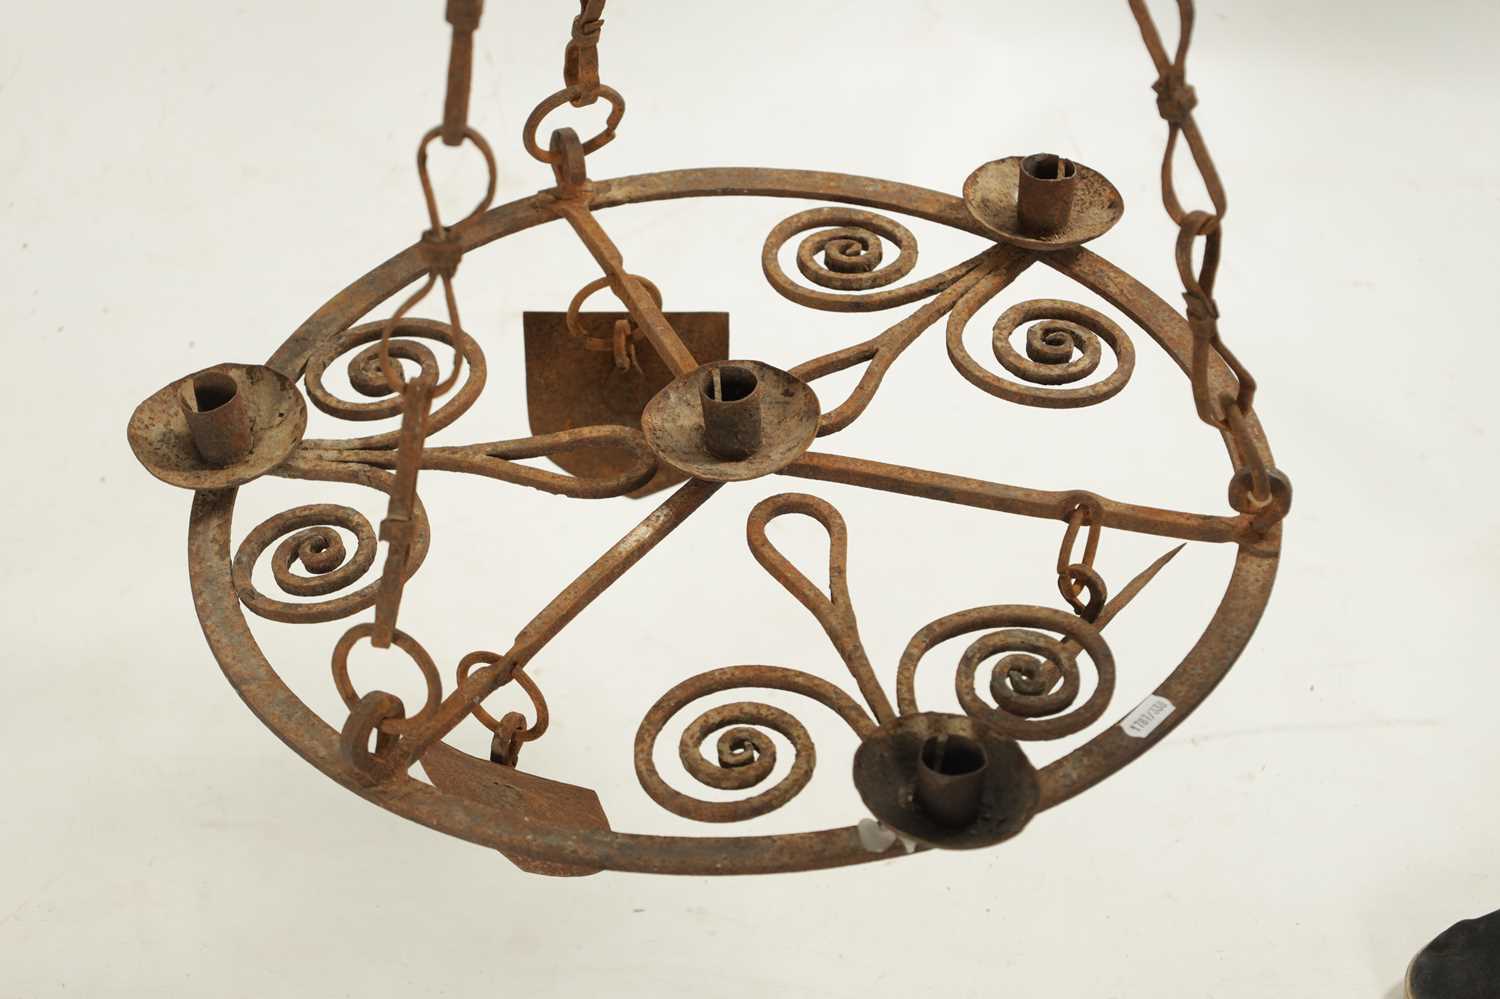 AN ARTS AND CRAFTS MEDIEVAL STYLE WROUGHT IRON HANGING CHANDELIER - Image 2 of 4